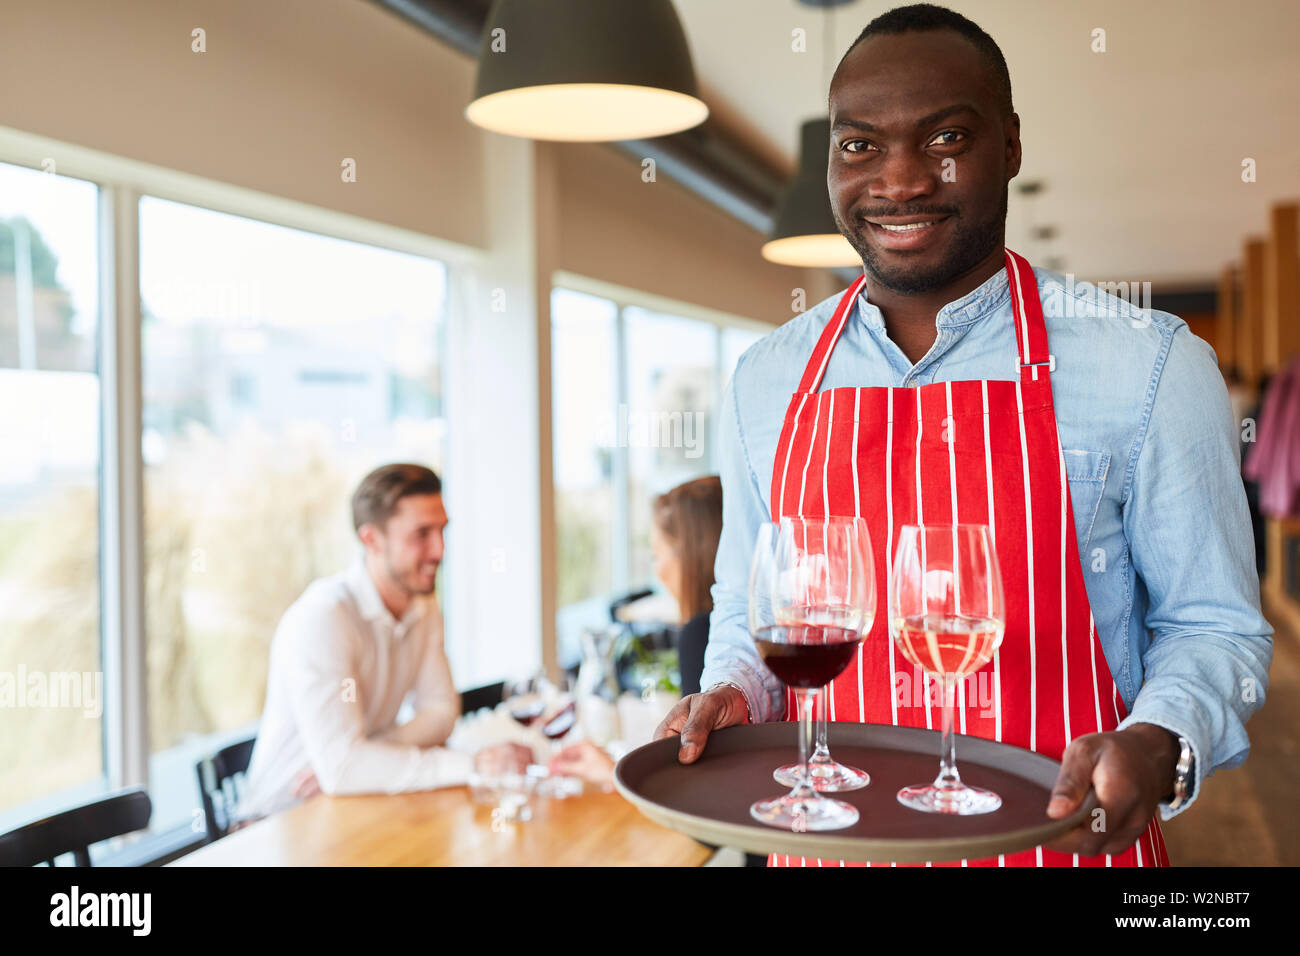 African man as a waiter serving glasses with wine on a tray Stock Photo